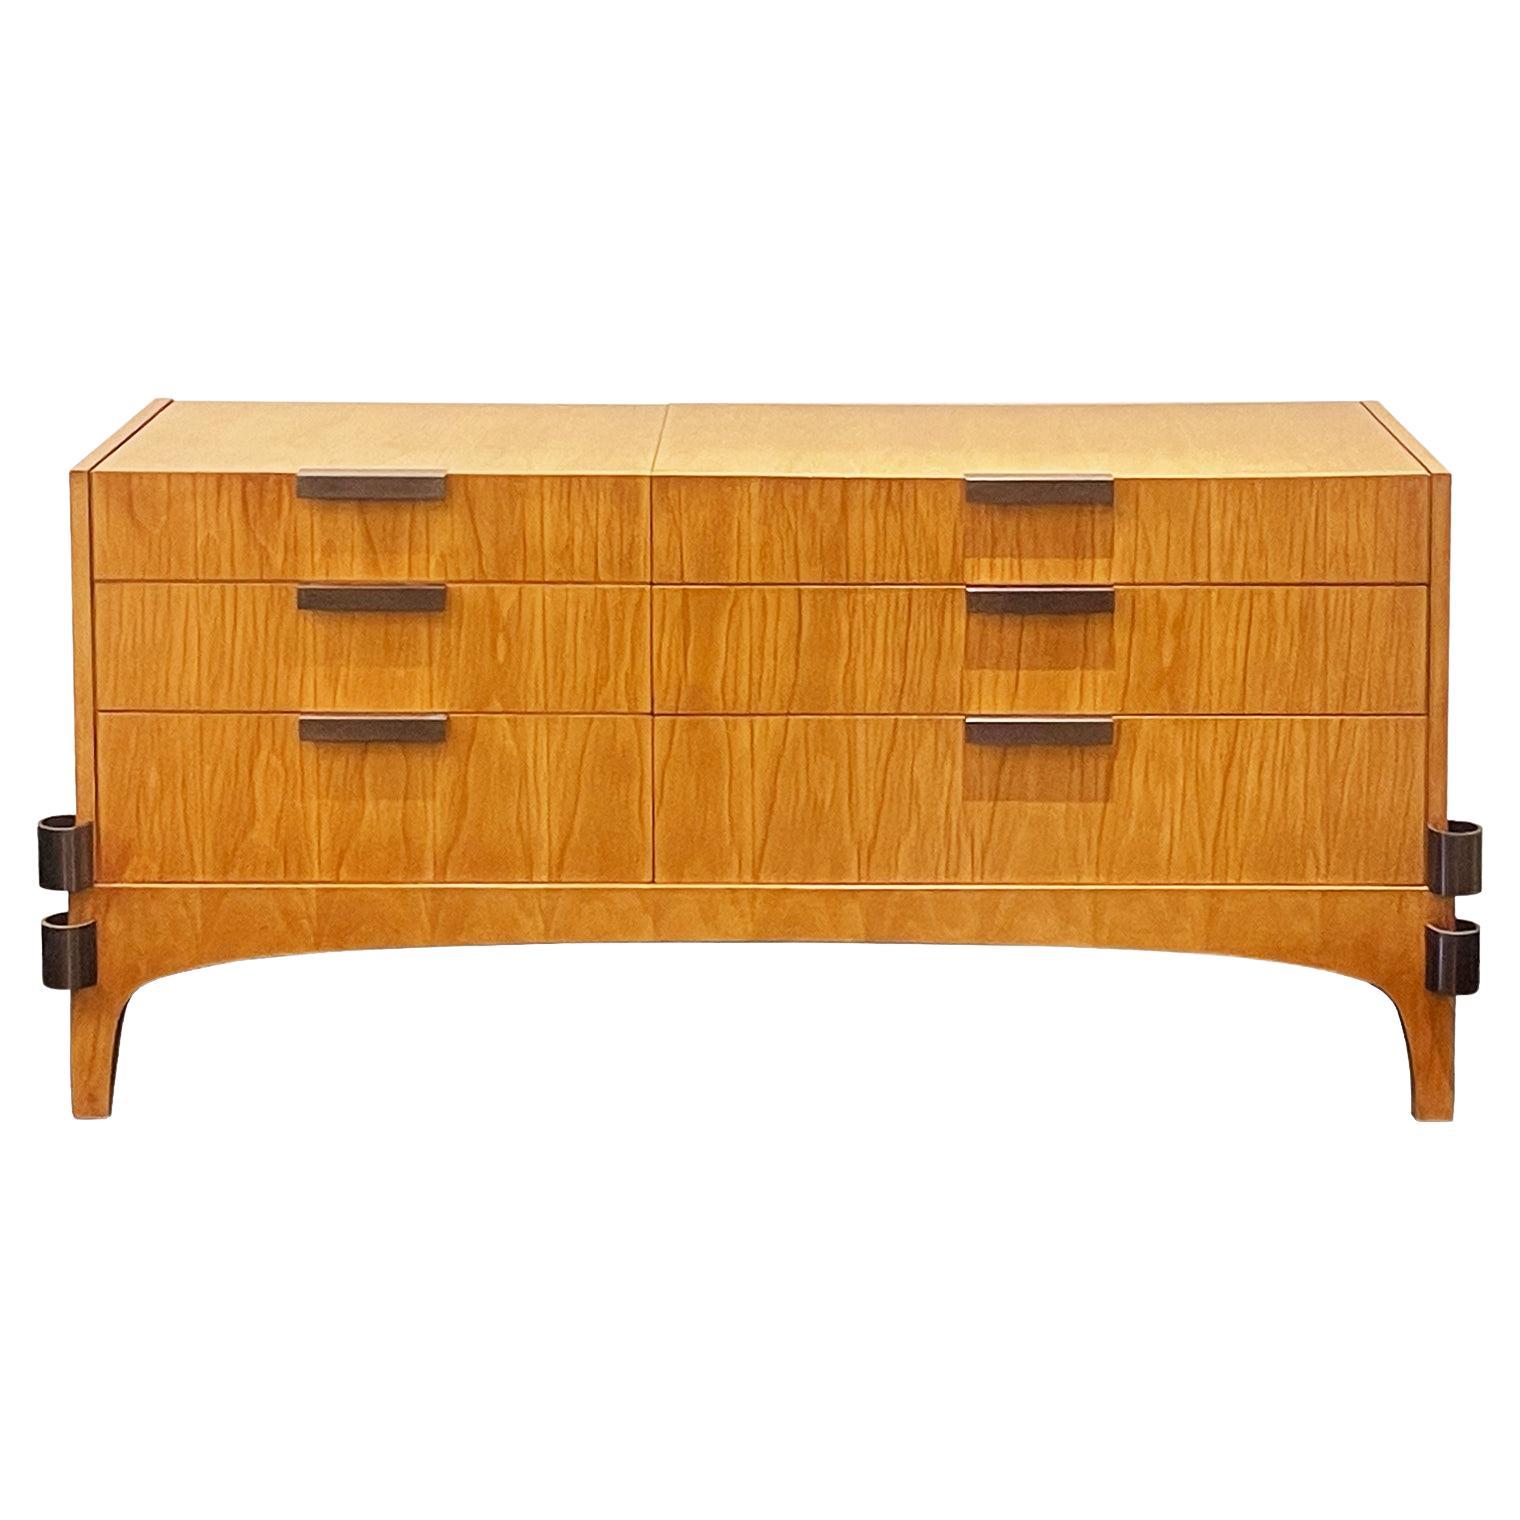 Italian Mid-Century Vintage Chest of Drawers - Fir Wood & Antique Brass Details For Sale